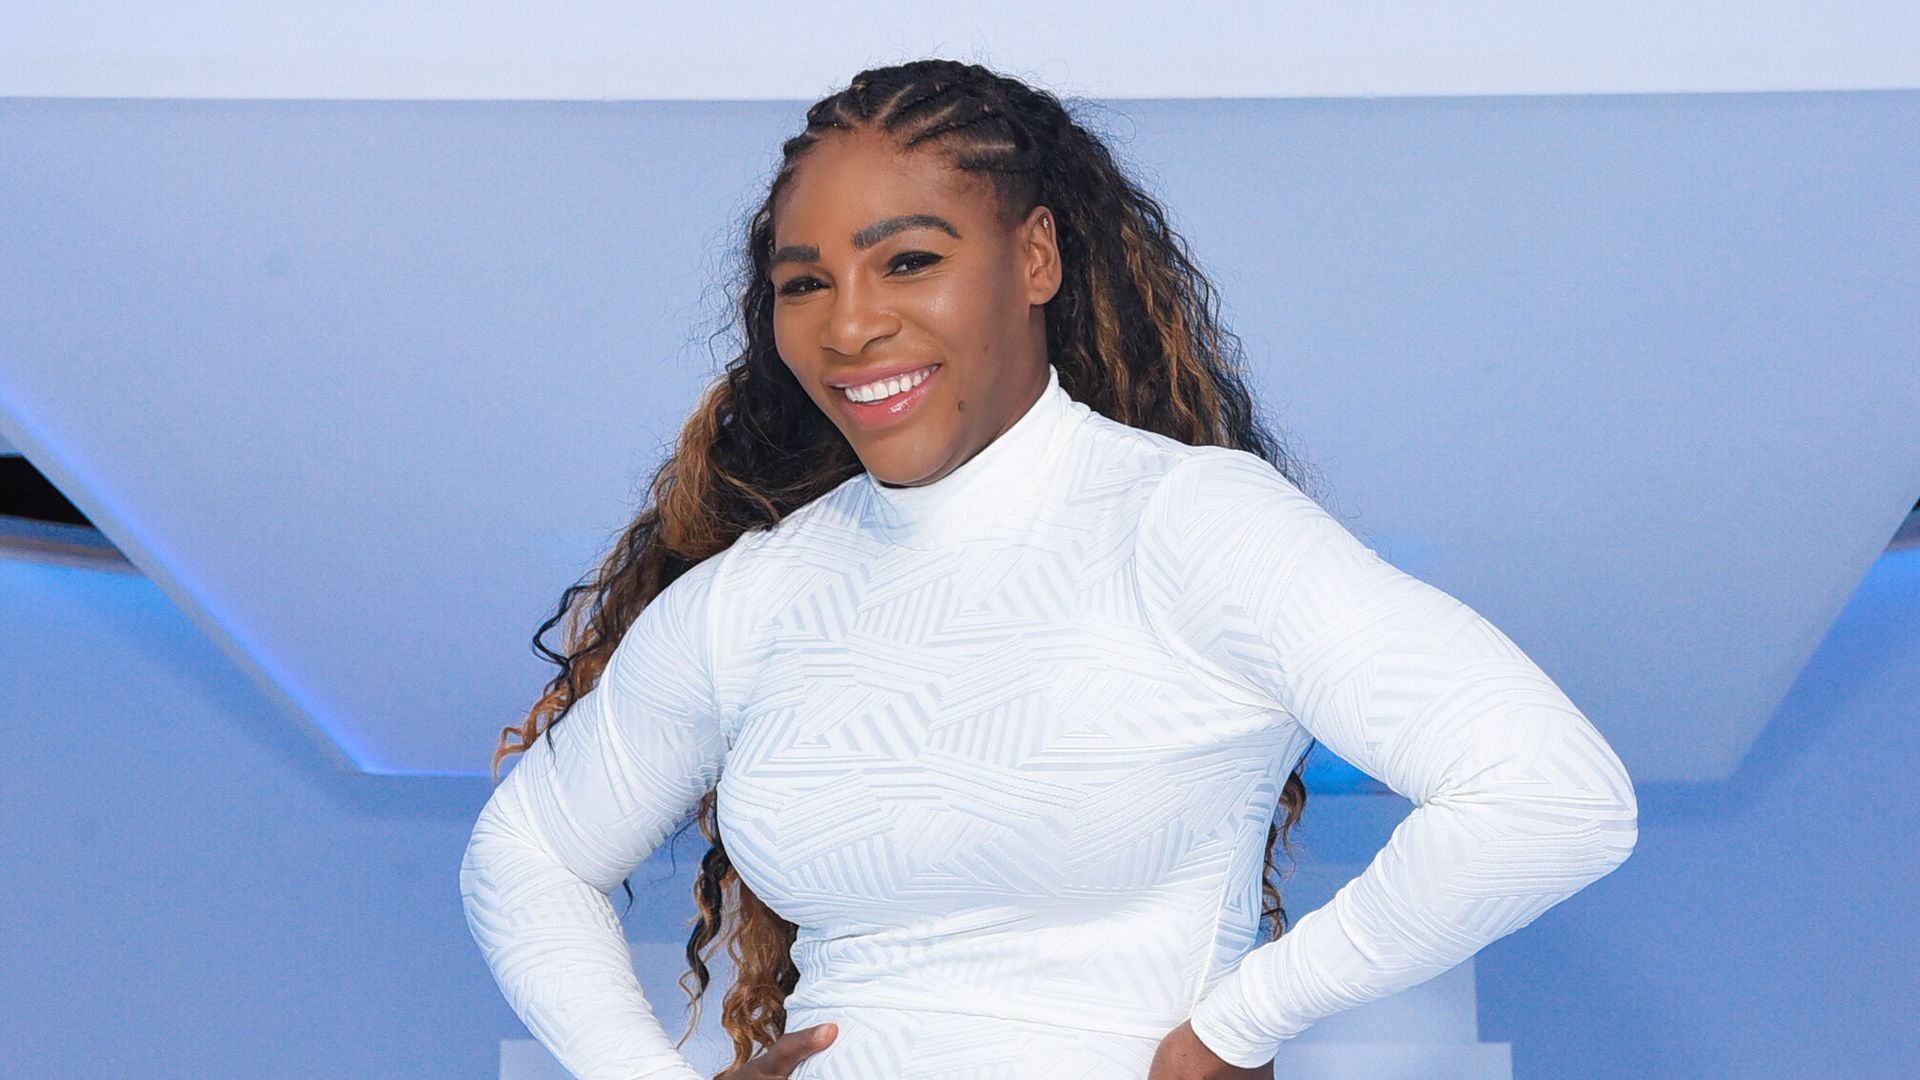 Serena Williams Made Forbes' 100 Most Powerful Women List in 2018 ...